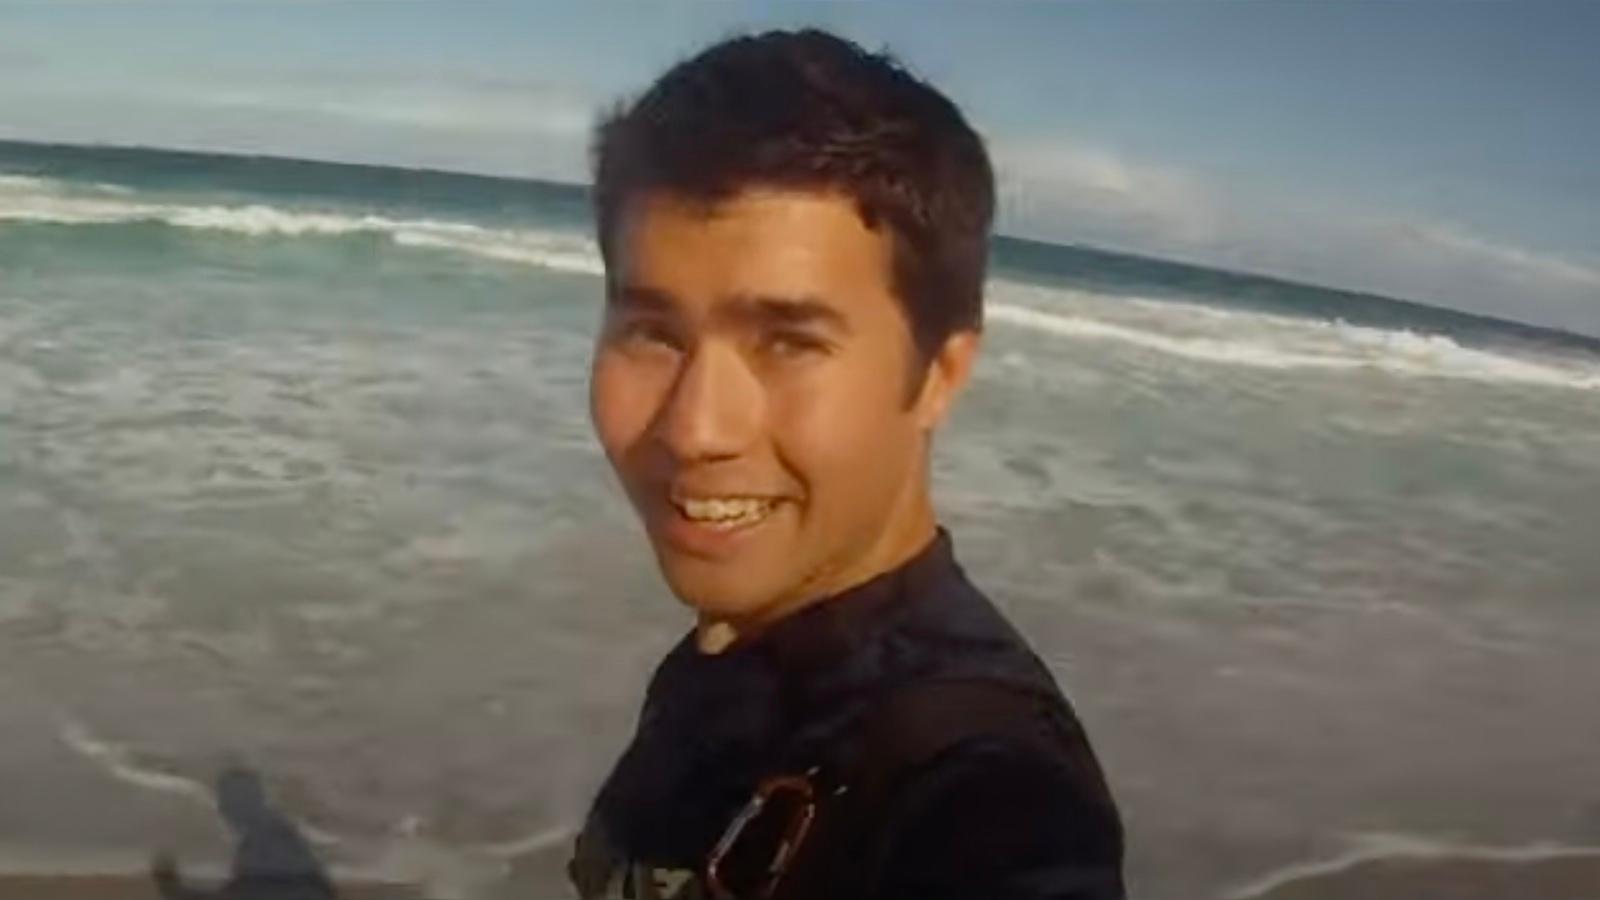 Image of John Chau in The Mission trailer